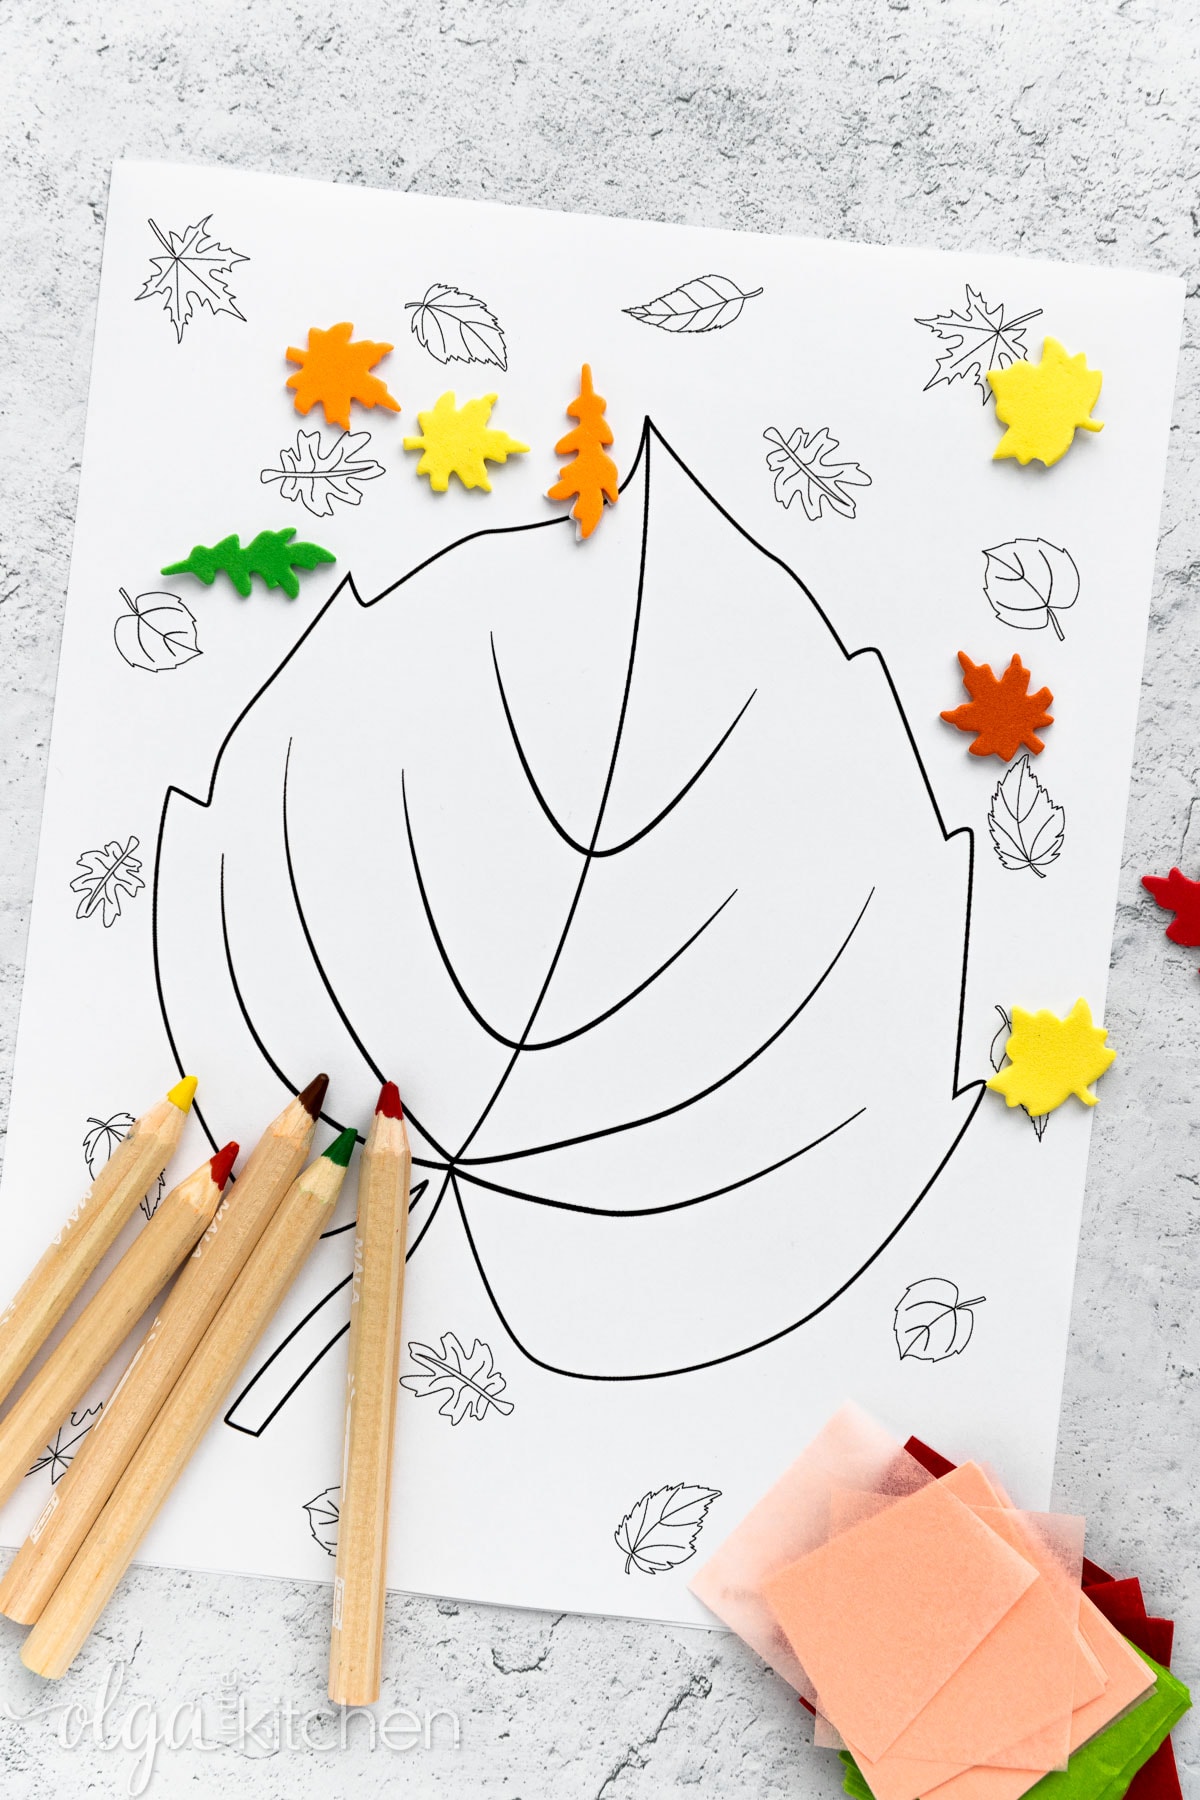 Print off these FREE printable autumn leaves coloring pages for a fall rainy day or a simple activity to do with your kids! #printables #coloringpages #olgainthekitchen #kidsactivity #fallcoloring #autumncoloring #school